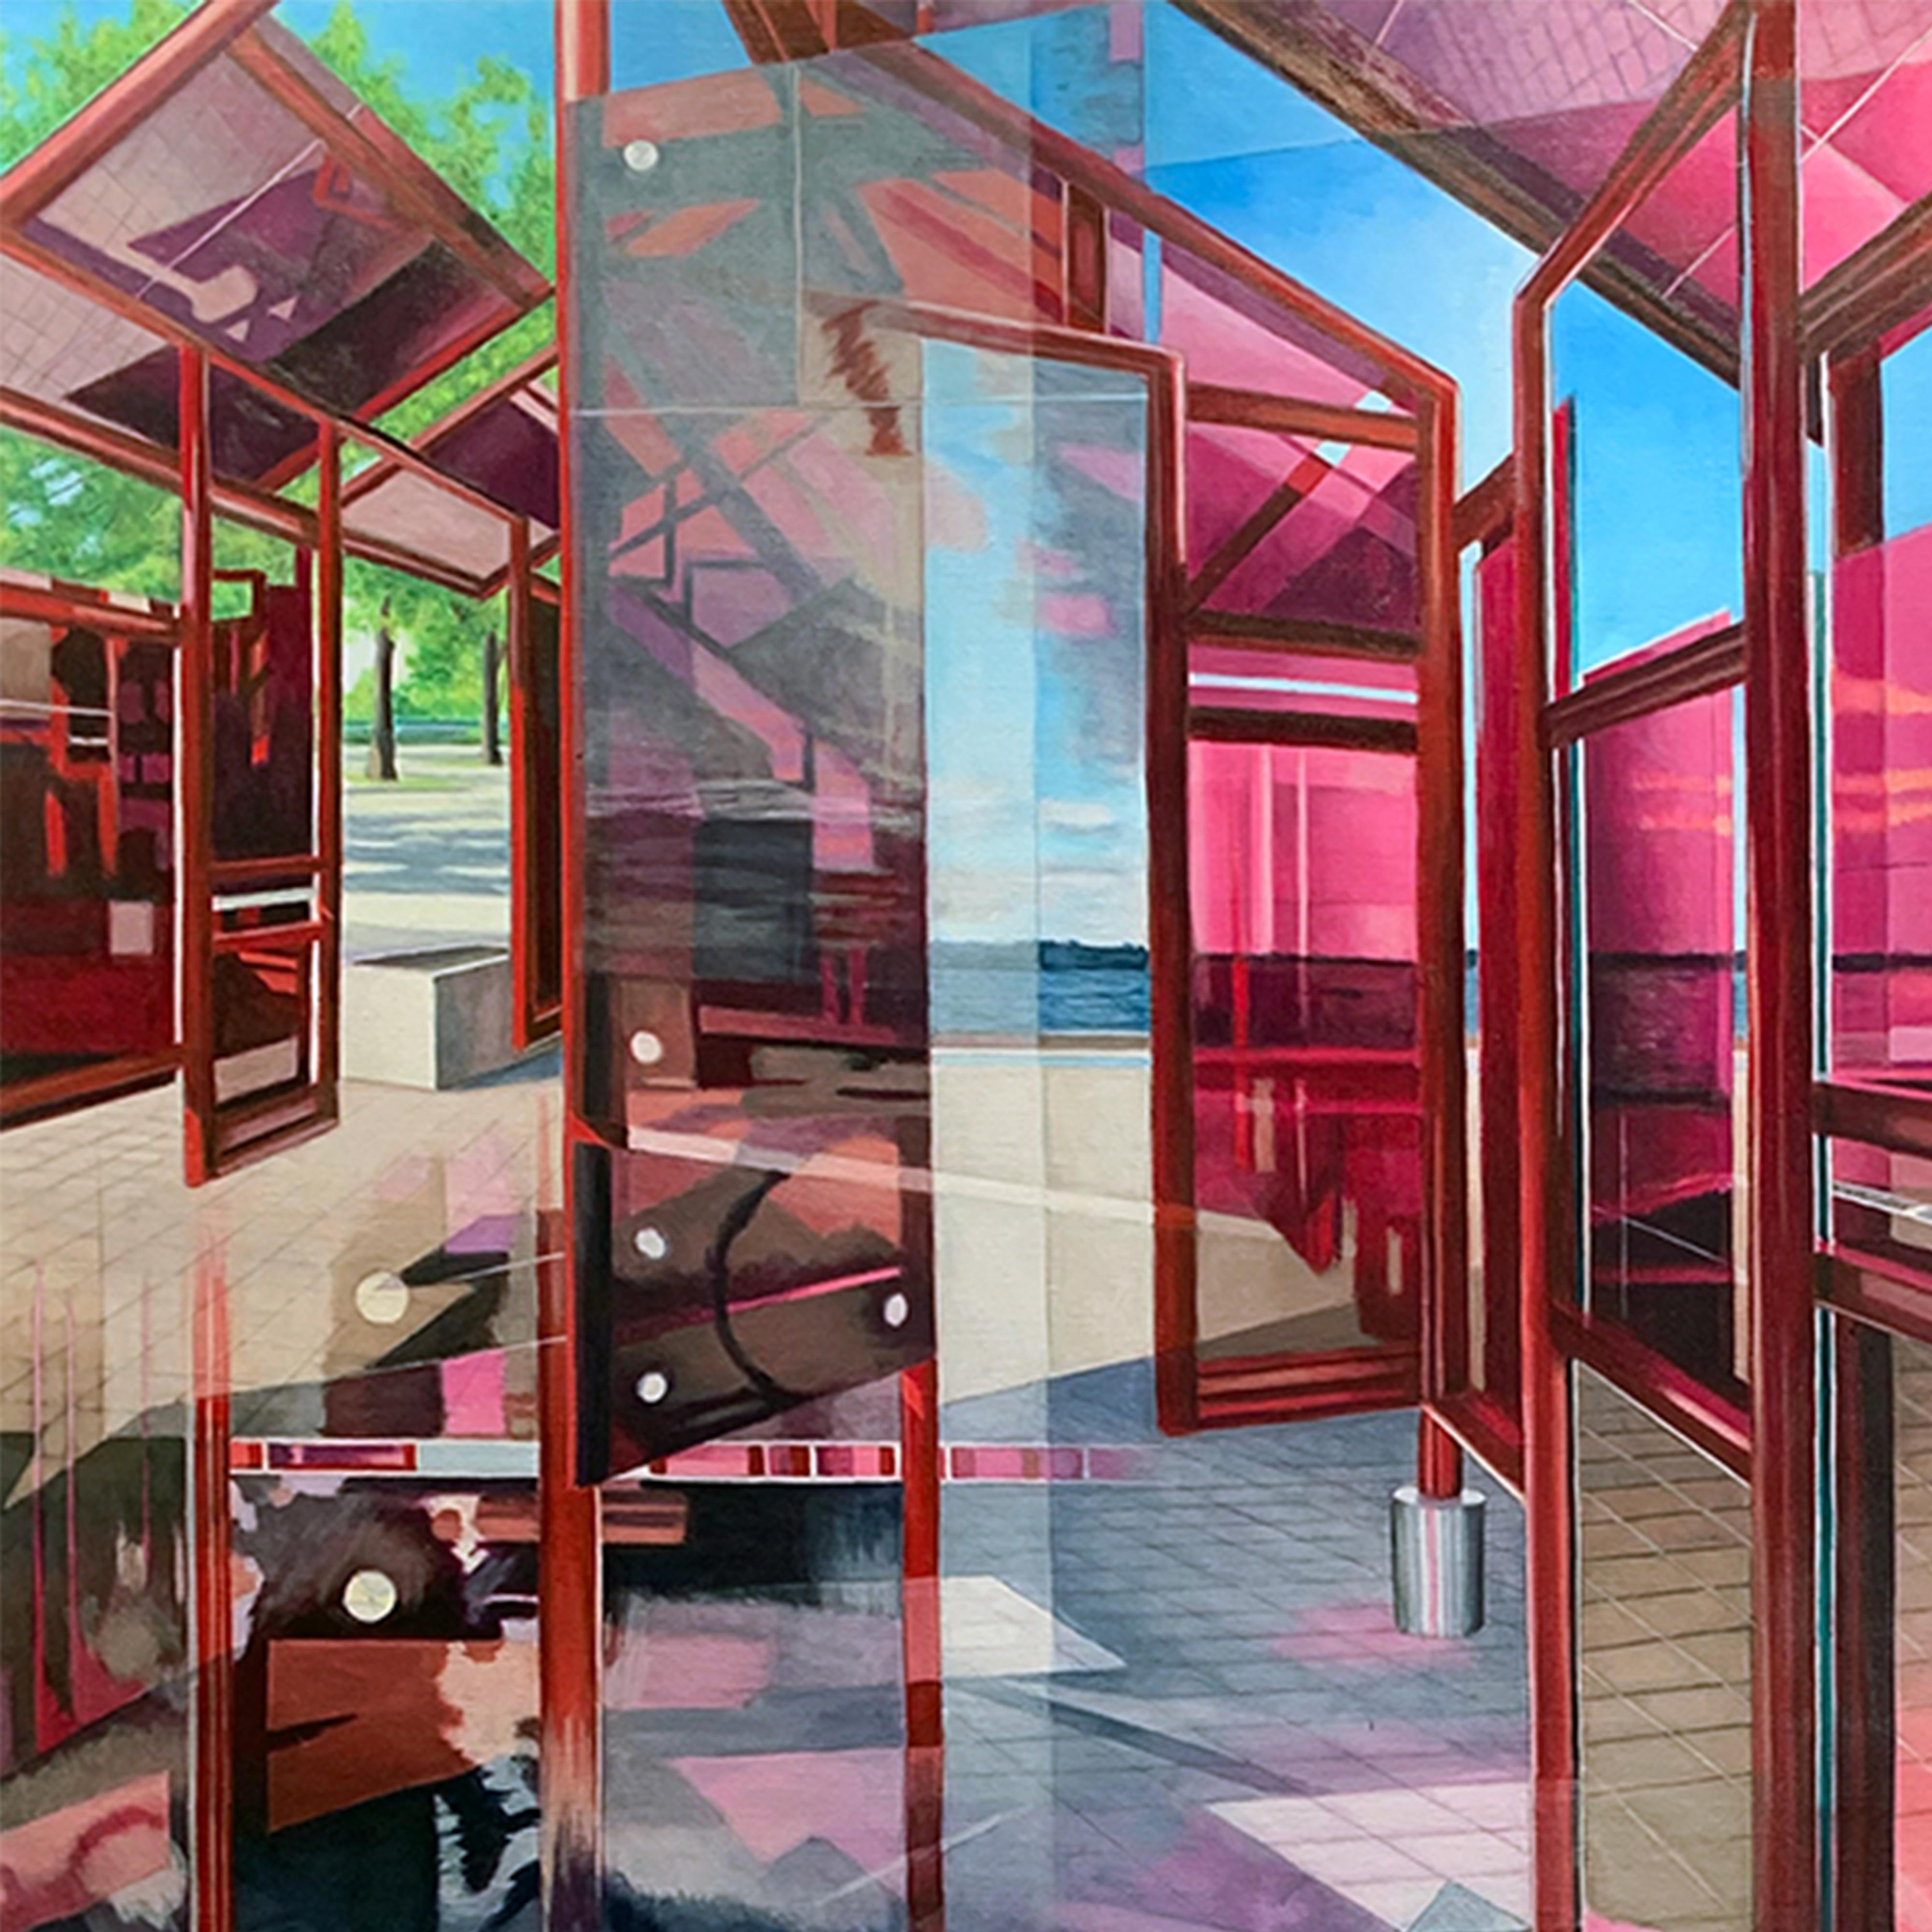 Anne Finkelstein’s hard-edged architectural paintings are built upon a foundation of poetry and history. Inspired by a lifetime of walking through New York City, Finkelstein’s own sense of memory and time are intrinsically tied to the forms of the